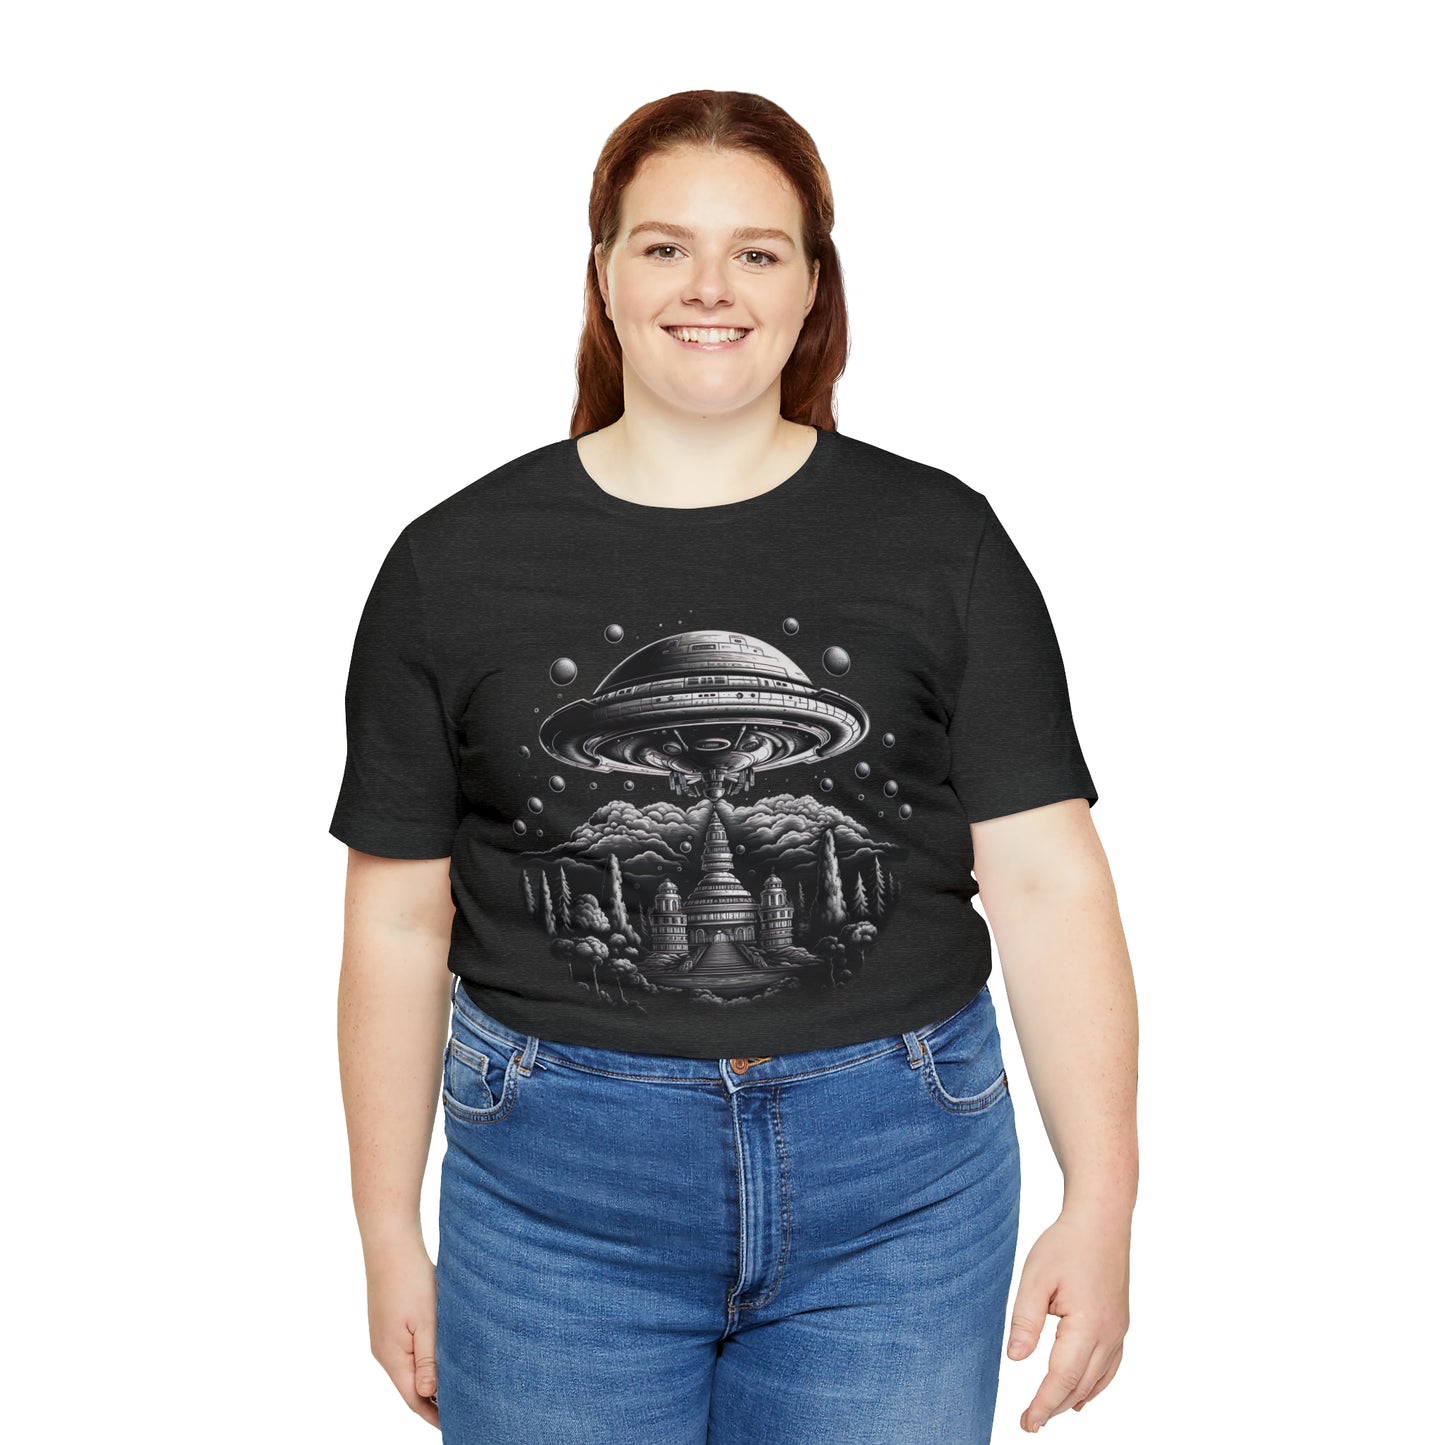 Ancient Temple Flyover UFO T-Shirt | Higher Density Living